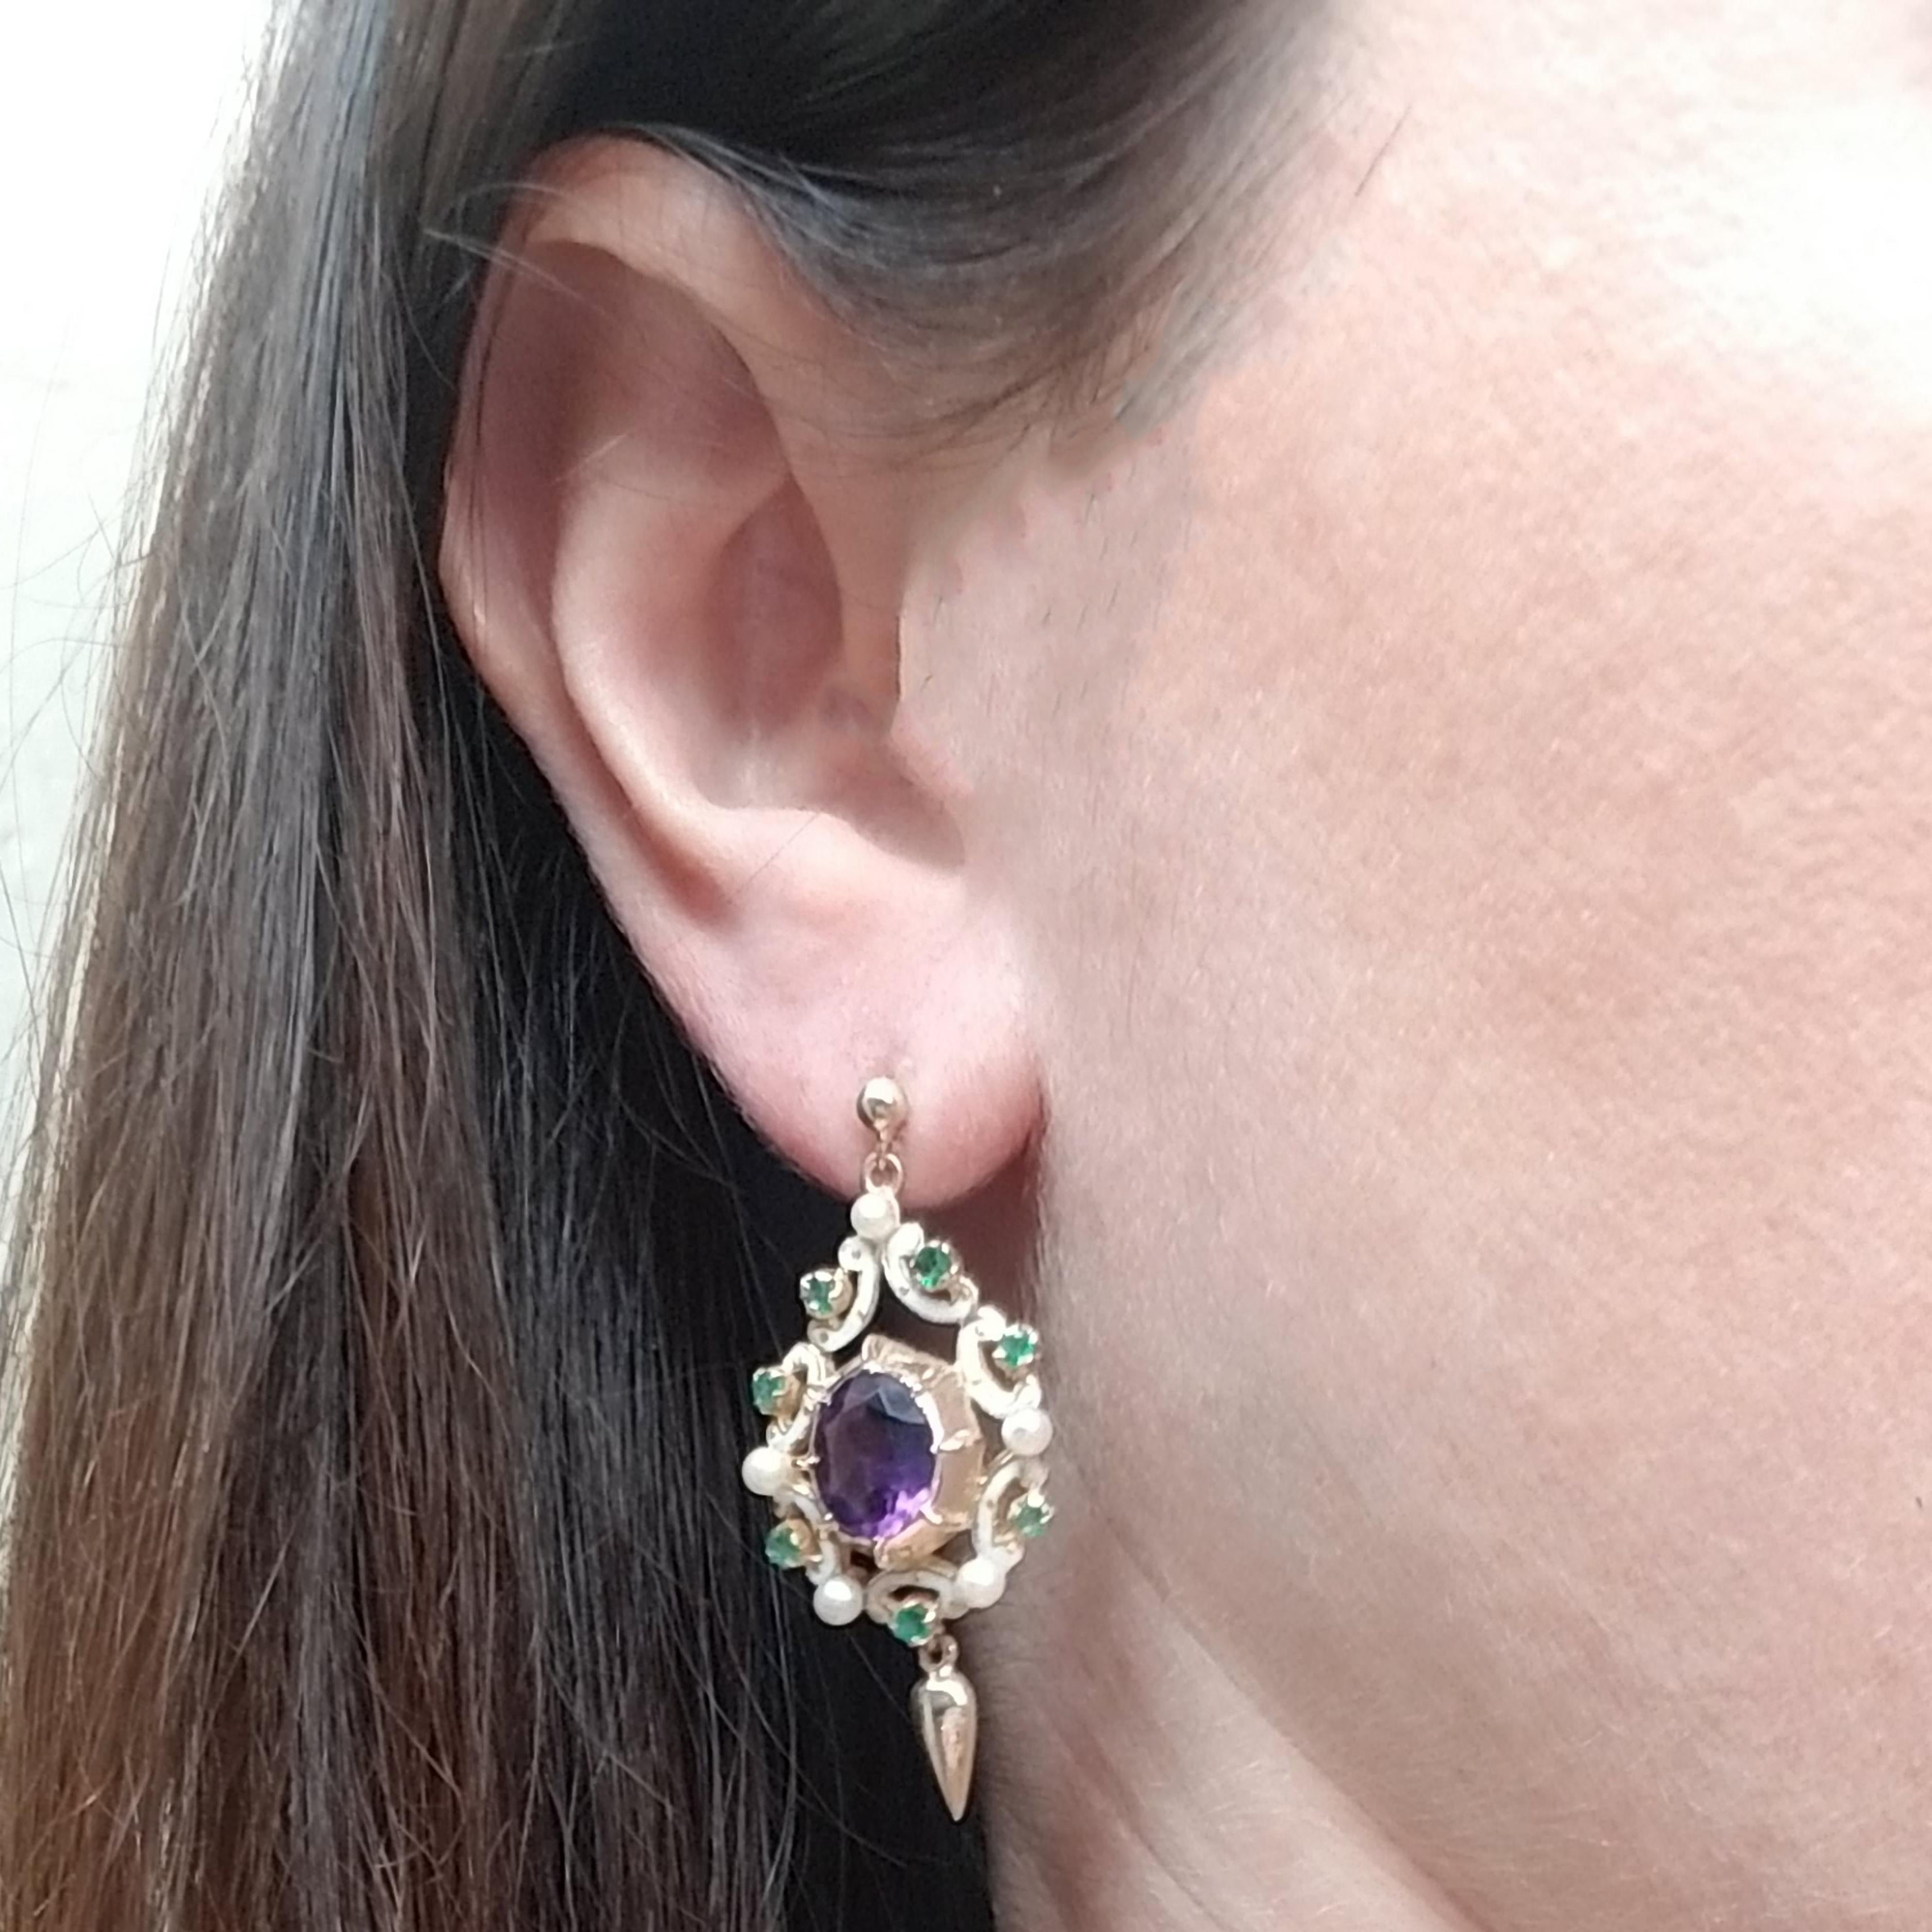 14 Karat Yellow Gold Dangle Earrings Featuring 2 Prong Set Oval Amethysts Totaling Approximately 4 Carats. The Center Stones are Complemented by 14 Prong Set Round Emeralds Totaling Approximately 0.42 Carats, 10 Cultured Pearls, & White Enamel